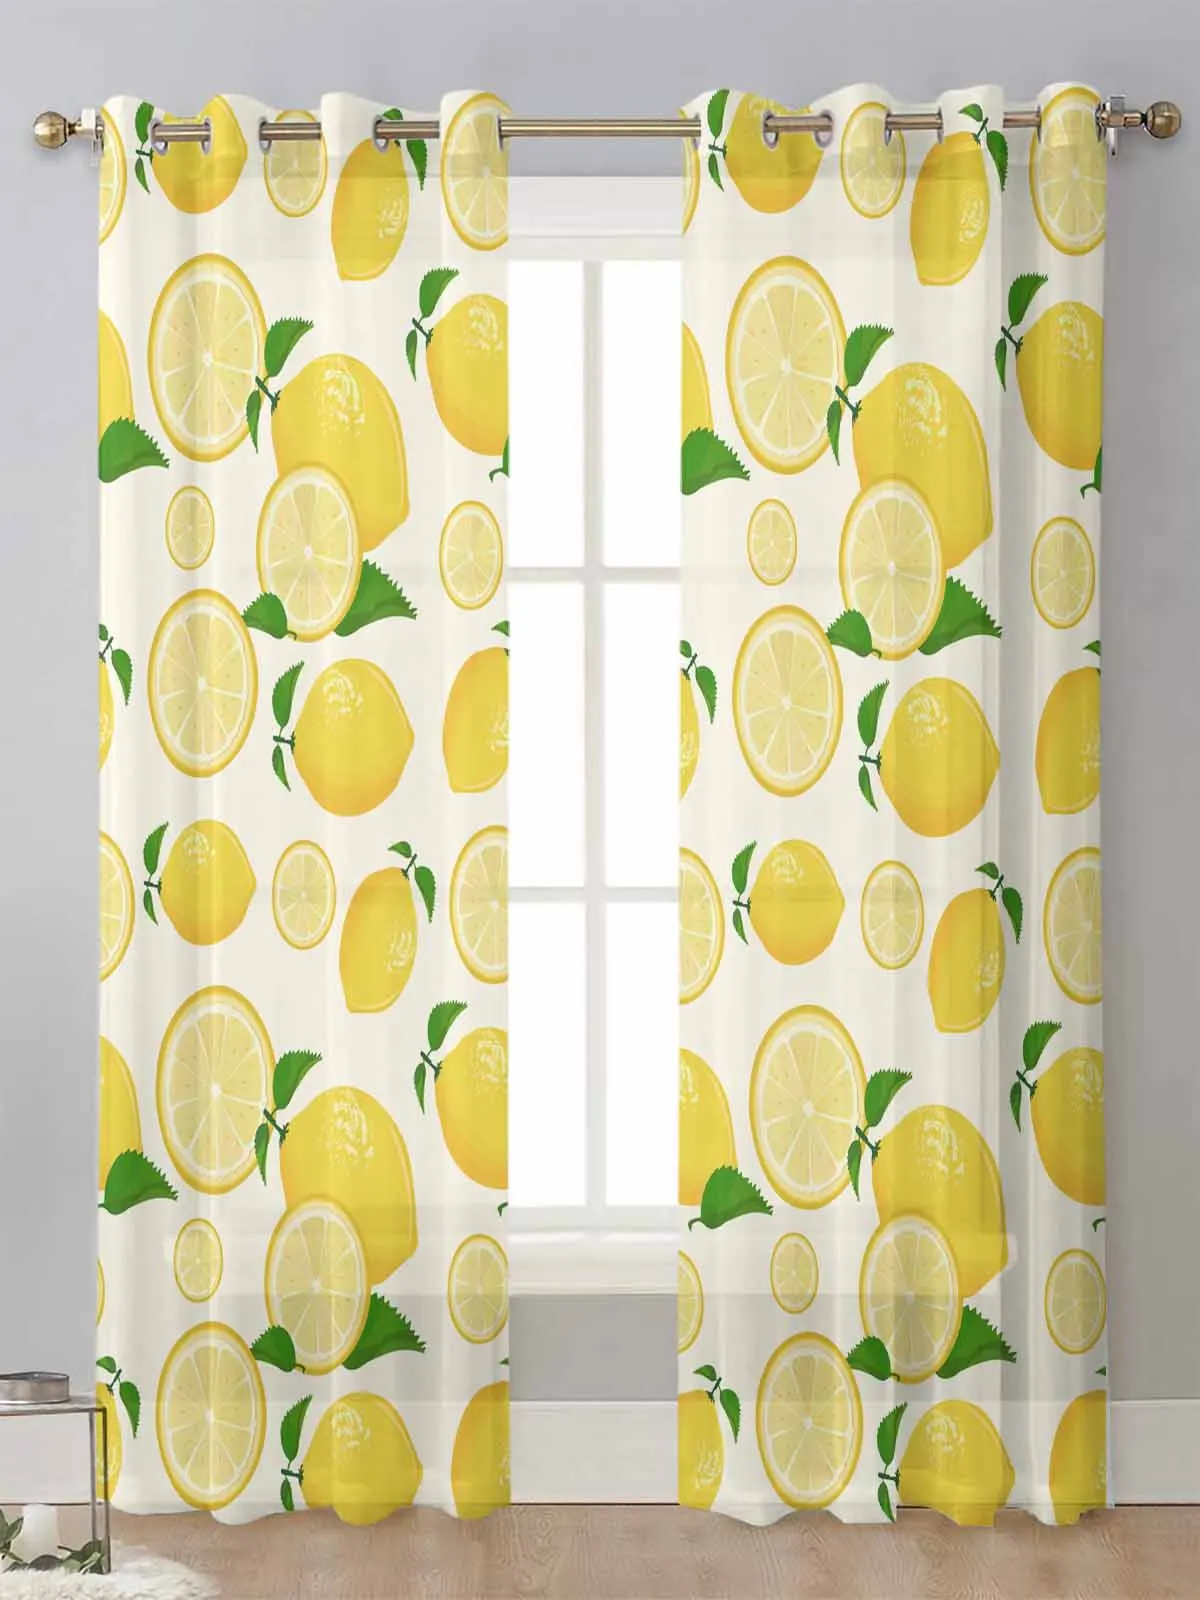 

Fresh Summer Style Lemon Fruit Sheer Curtains For Living Room Window Transparent Voile Tulle Curtain Cortinas Drapes Home Decor